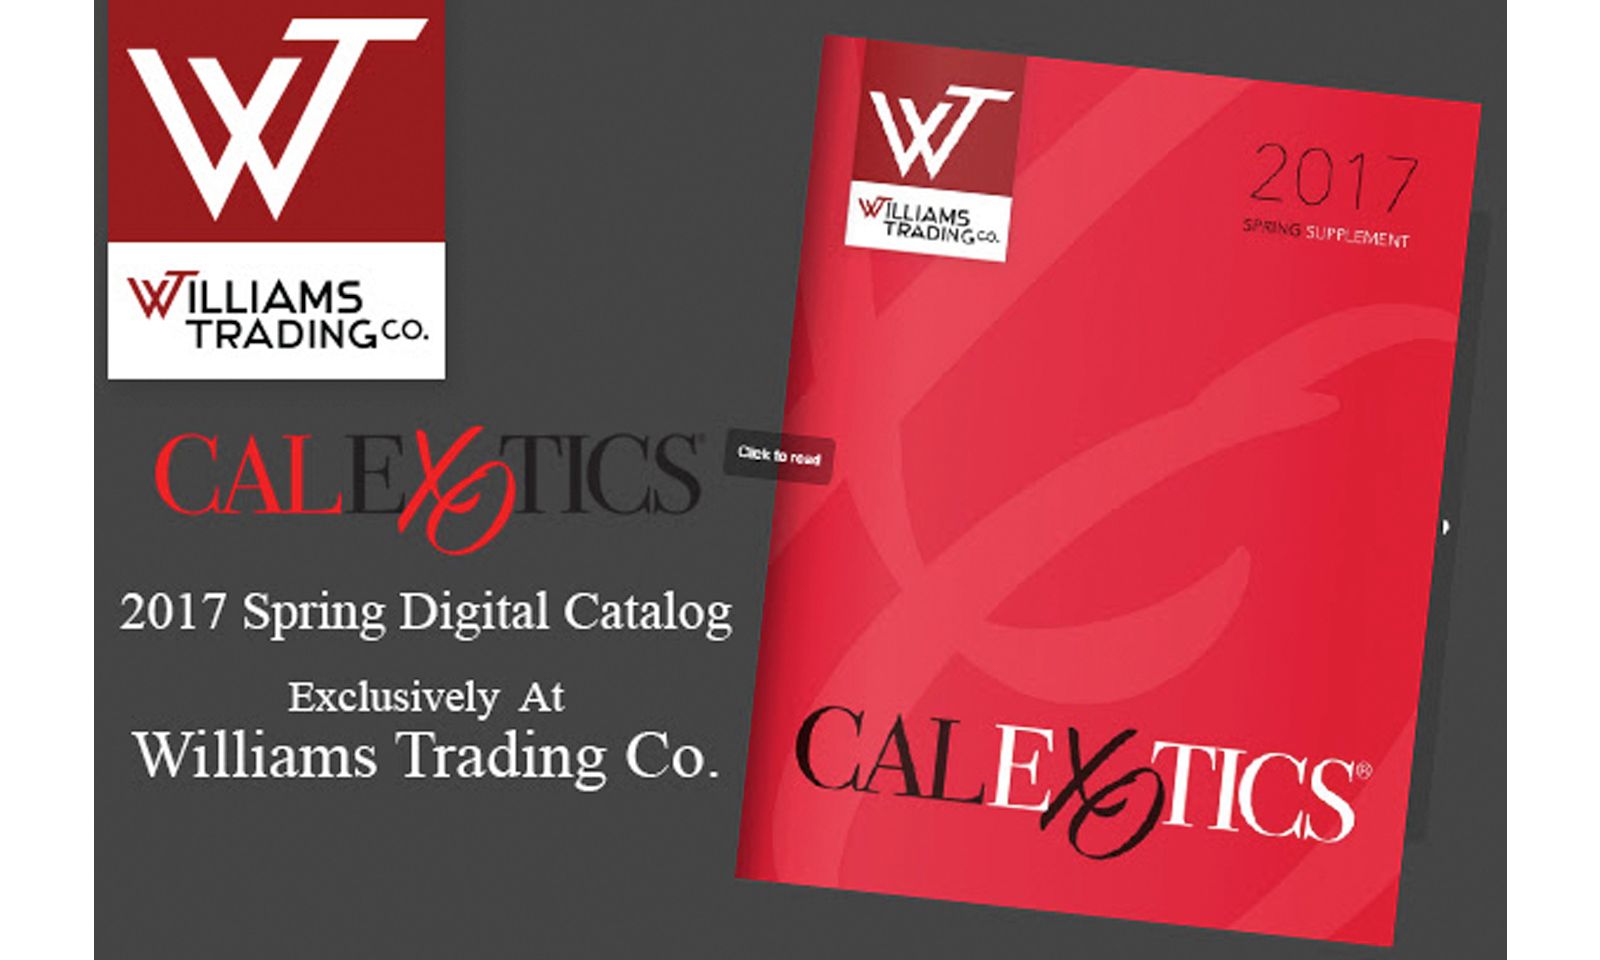 CalExotics Spring Digital Catalog Exclusively At Williams Trading Co.